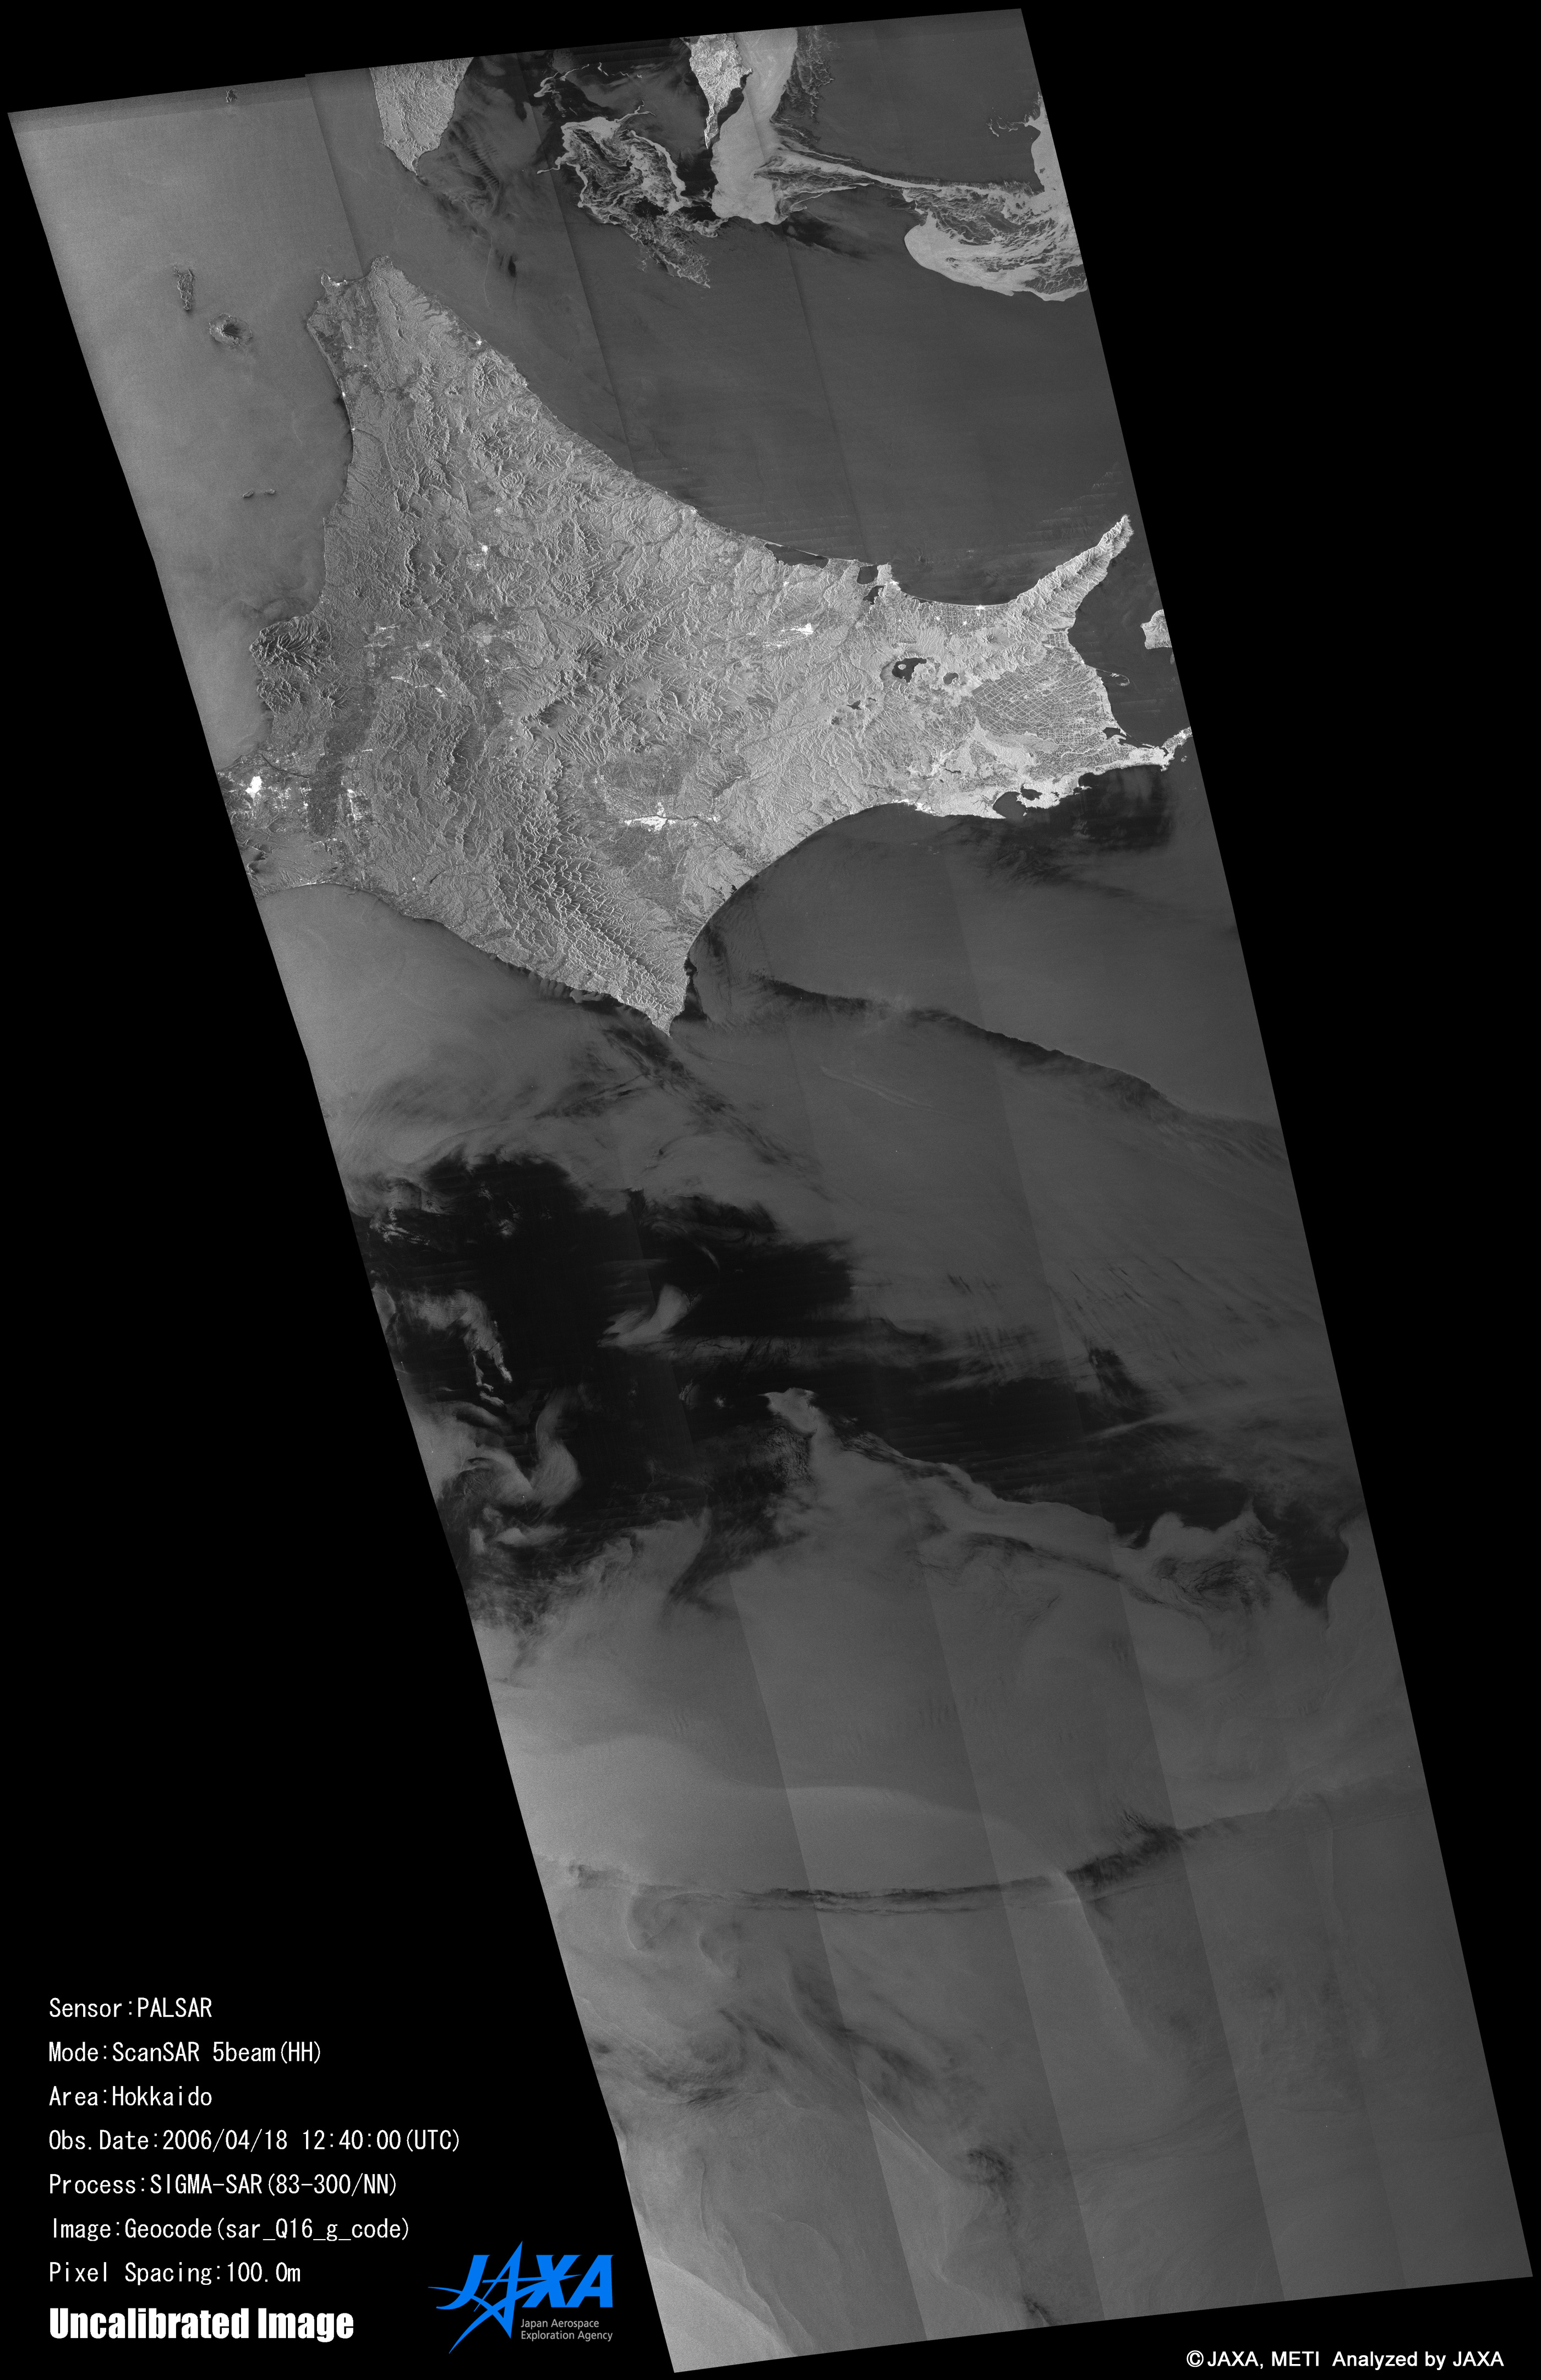 Sea of Okhotsk and Sea ice, image data acquired by PALSAR (ScanSAR) during the night on Apr. 18, 2006.